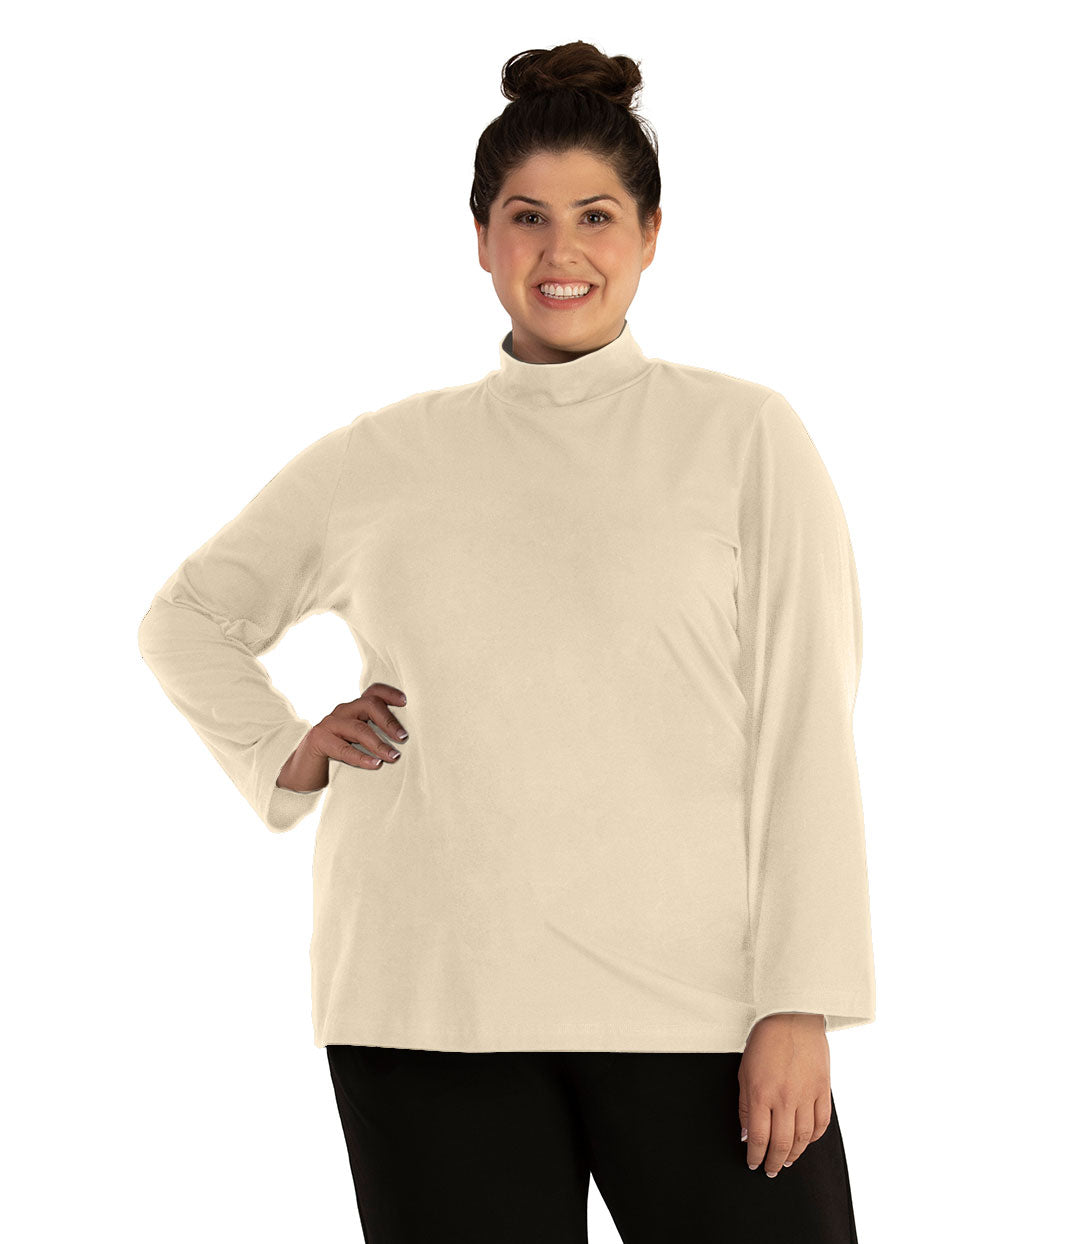 Plus size woman, facing front looking left, wearing JunoActive plus size Stretch Naturals Lite Mock Neck Top in the color Cream. She is wearing JunoActive Plus Size Leggings in the color Black.